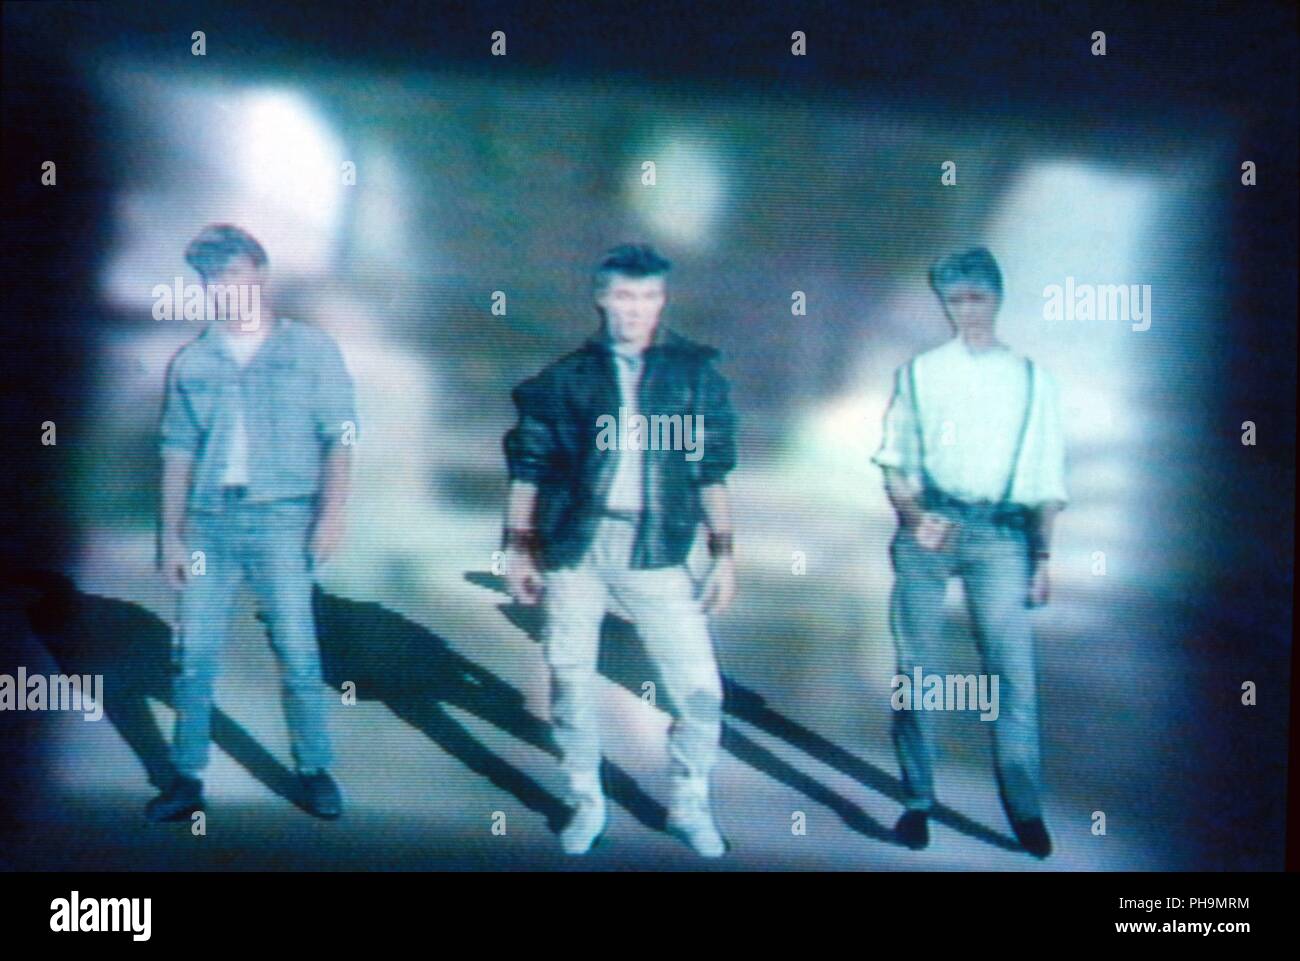 a-ha", norwegische Popgruppe in ihrem Videoclip zum Song "Take On Me",  1985. Norwegian pop band "a-ha" in their video clip "Take On Me", 198 |  usage Stock Photo - Alamy